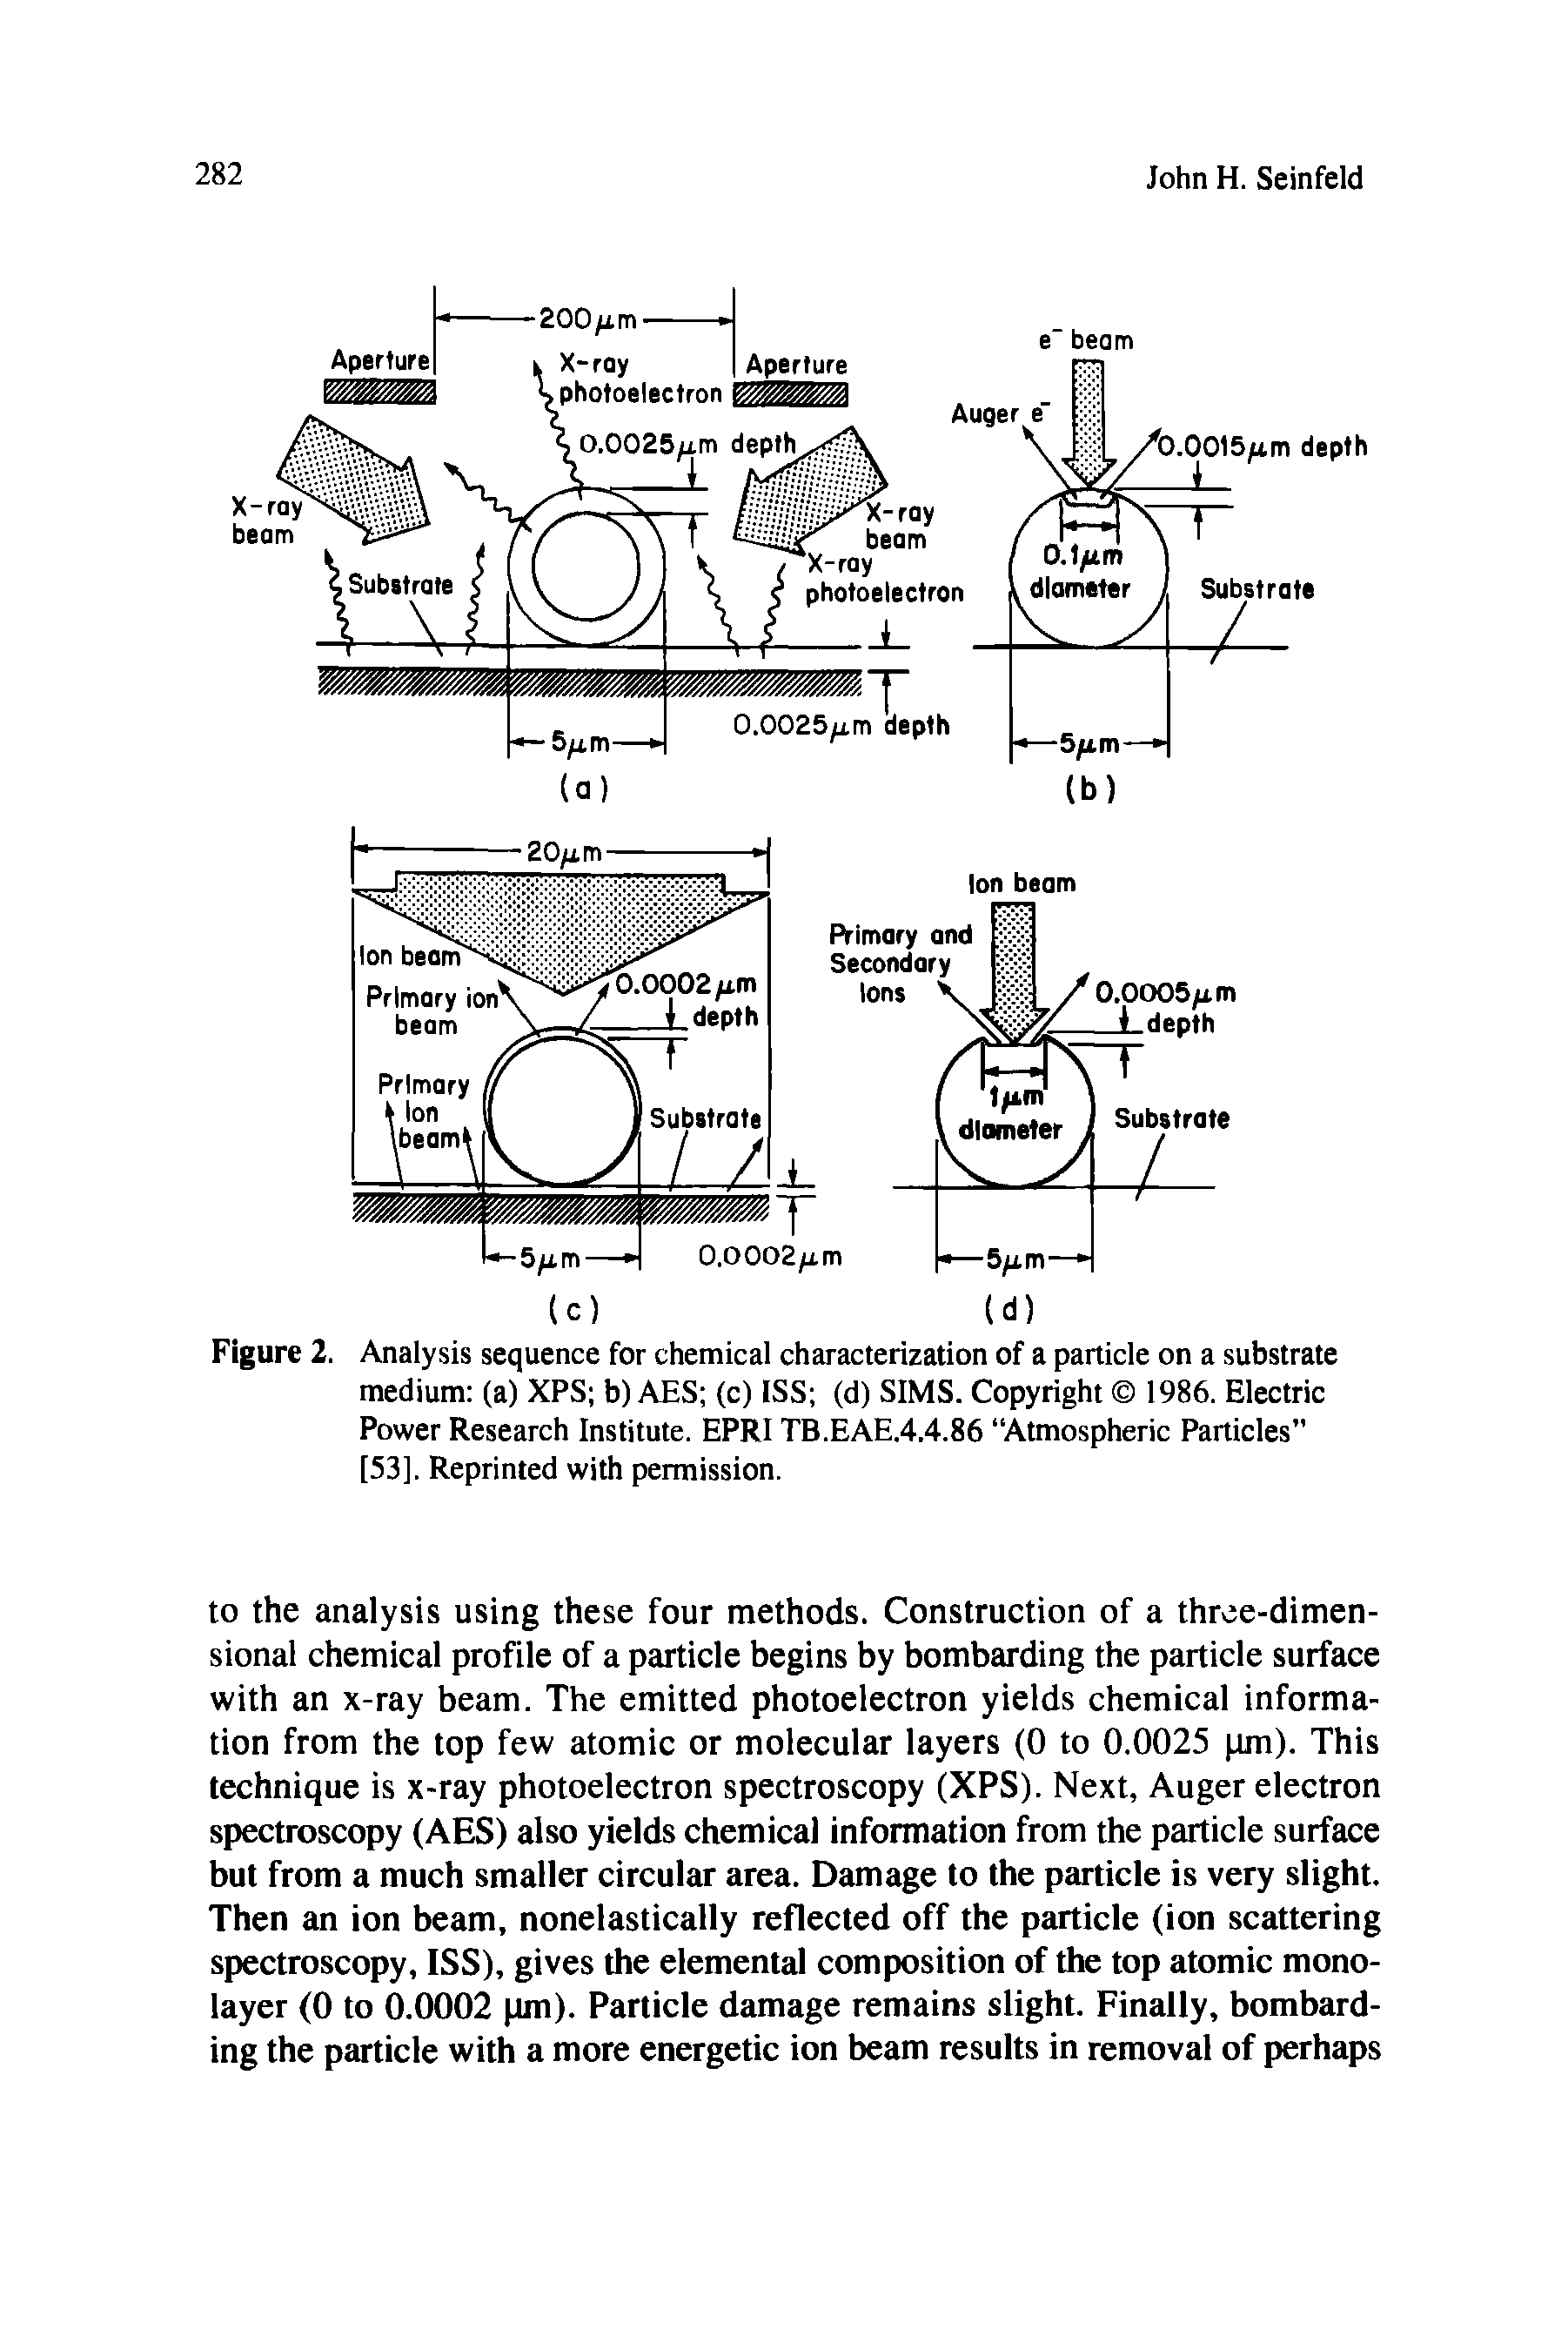 Figure 2. Analysis sequence for chemical characterization of a particle on a substrate medium (a) XPS b) AES (c) ISS (d) SIMS. Copyright 1986. Electric Power Research Institute. EPRI TB.EAE.4.4.86 Atmospheric Particles [53], Reprinted with permission.